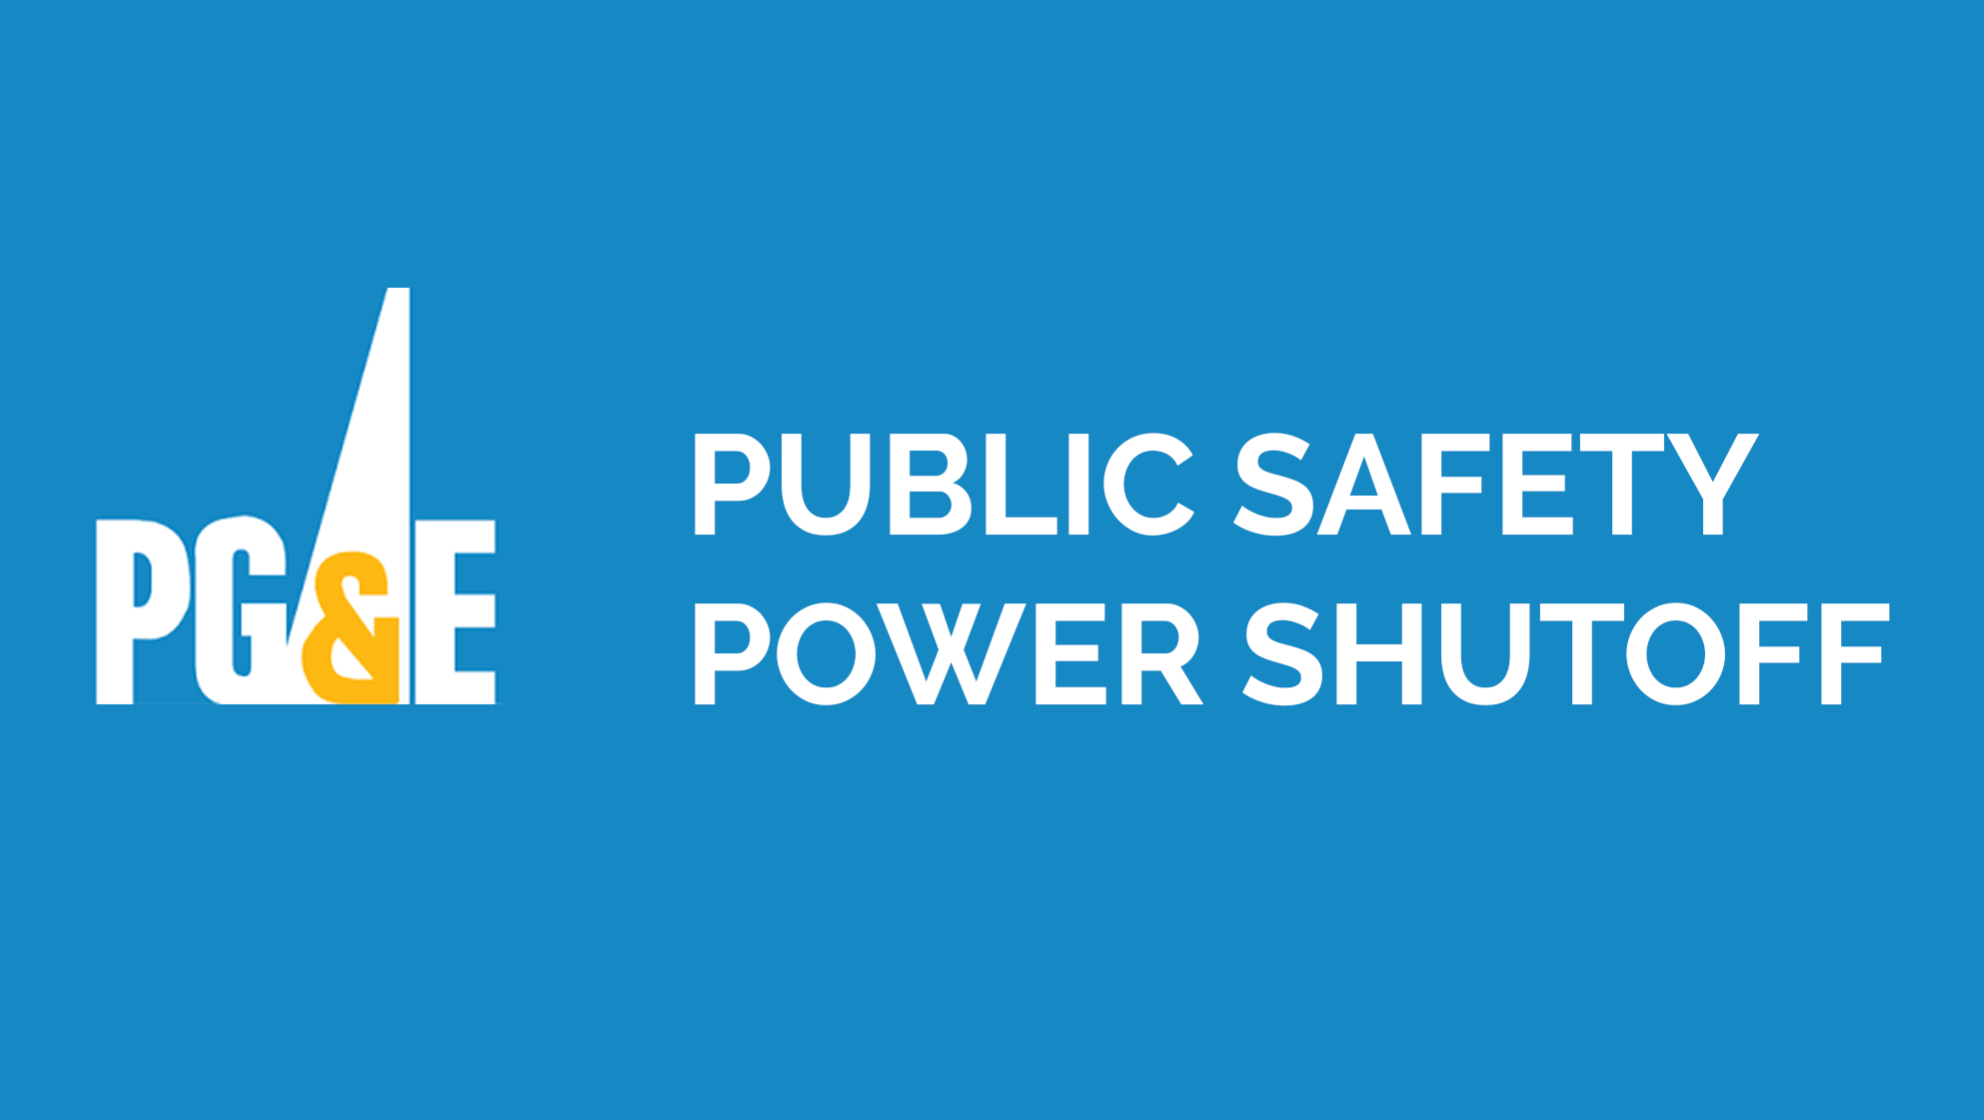 High Winds, Dry Conditions Mean PG&E May Need to Proactively Turn Off Power for Safety Wednesday Morning in Portions of Eight Counties